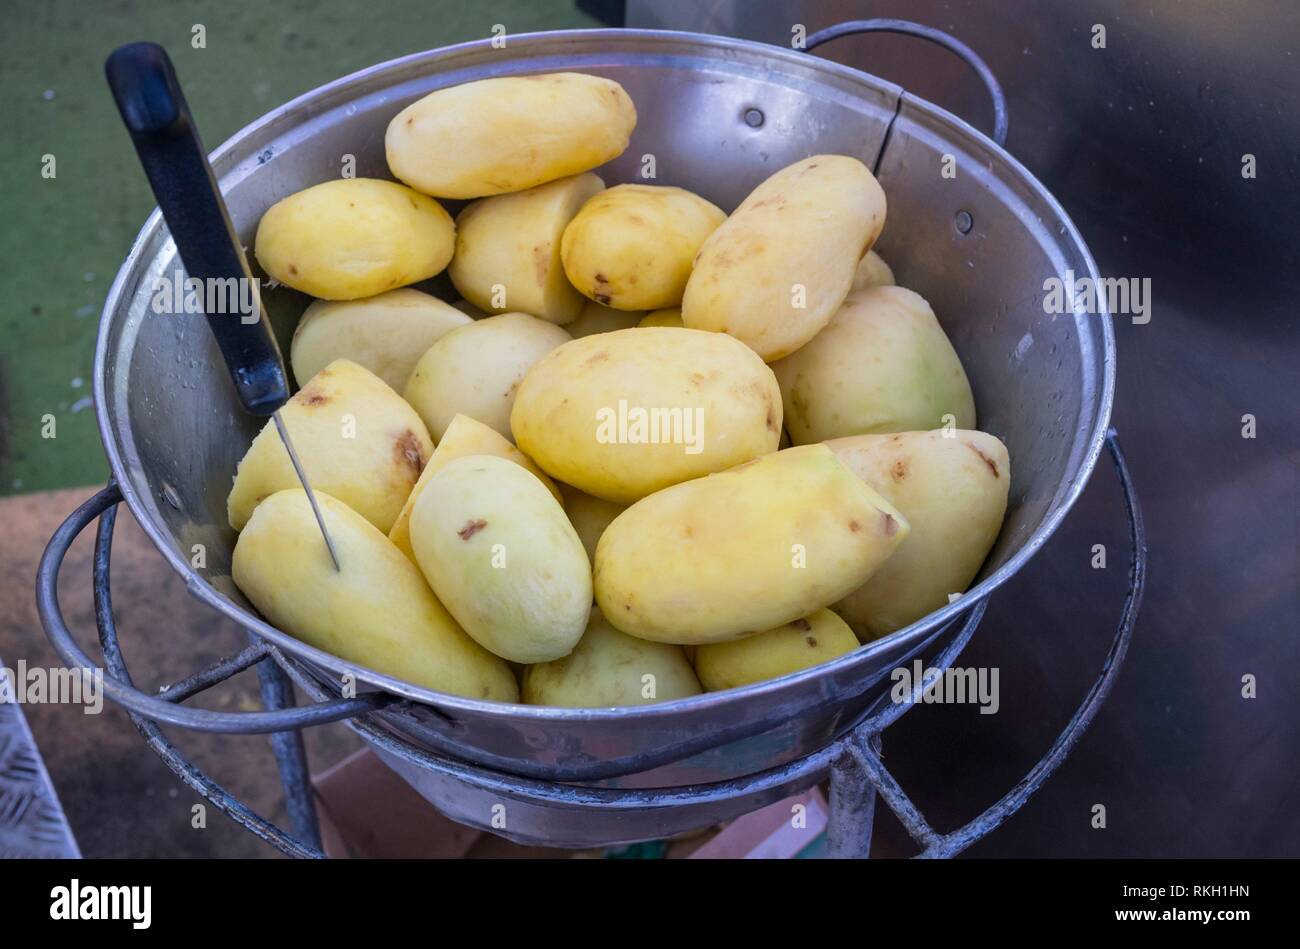 Peeled potatoes ready to be fried at fairground stall. Closeup. Stock Photo